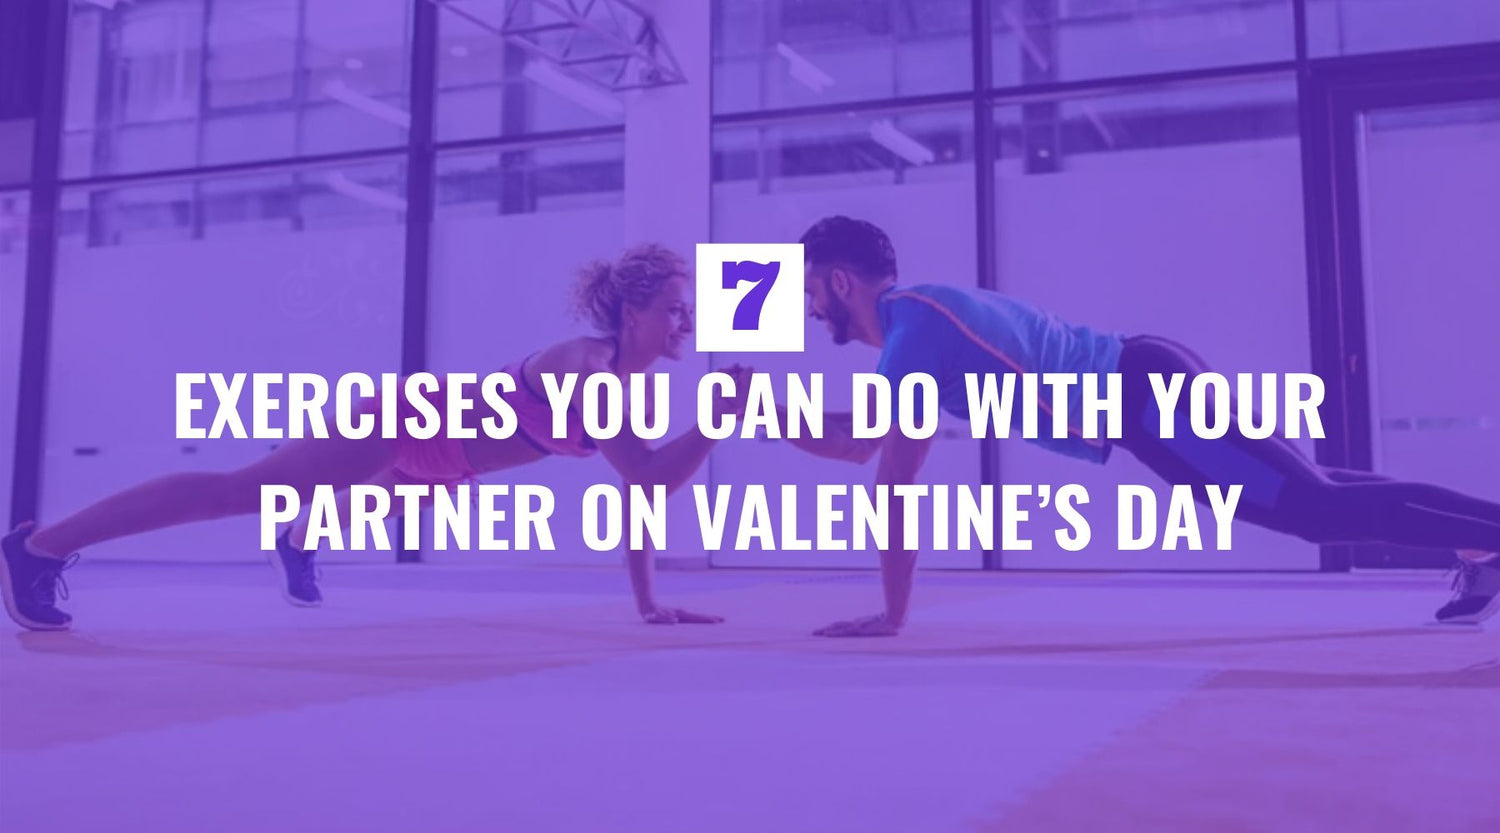 7 Exercises You Can Do with Your Partner on Valentine’s Day